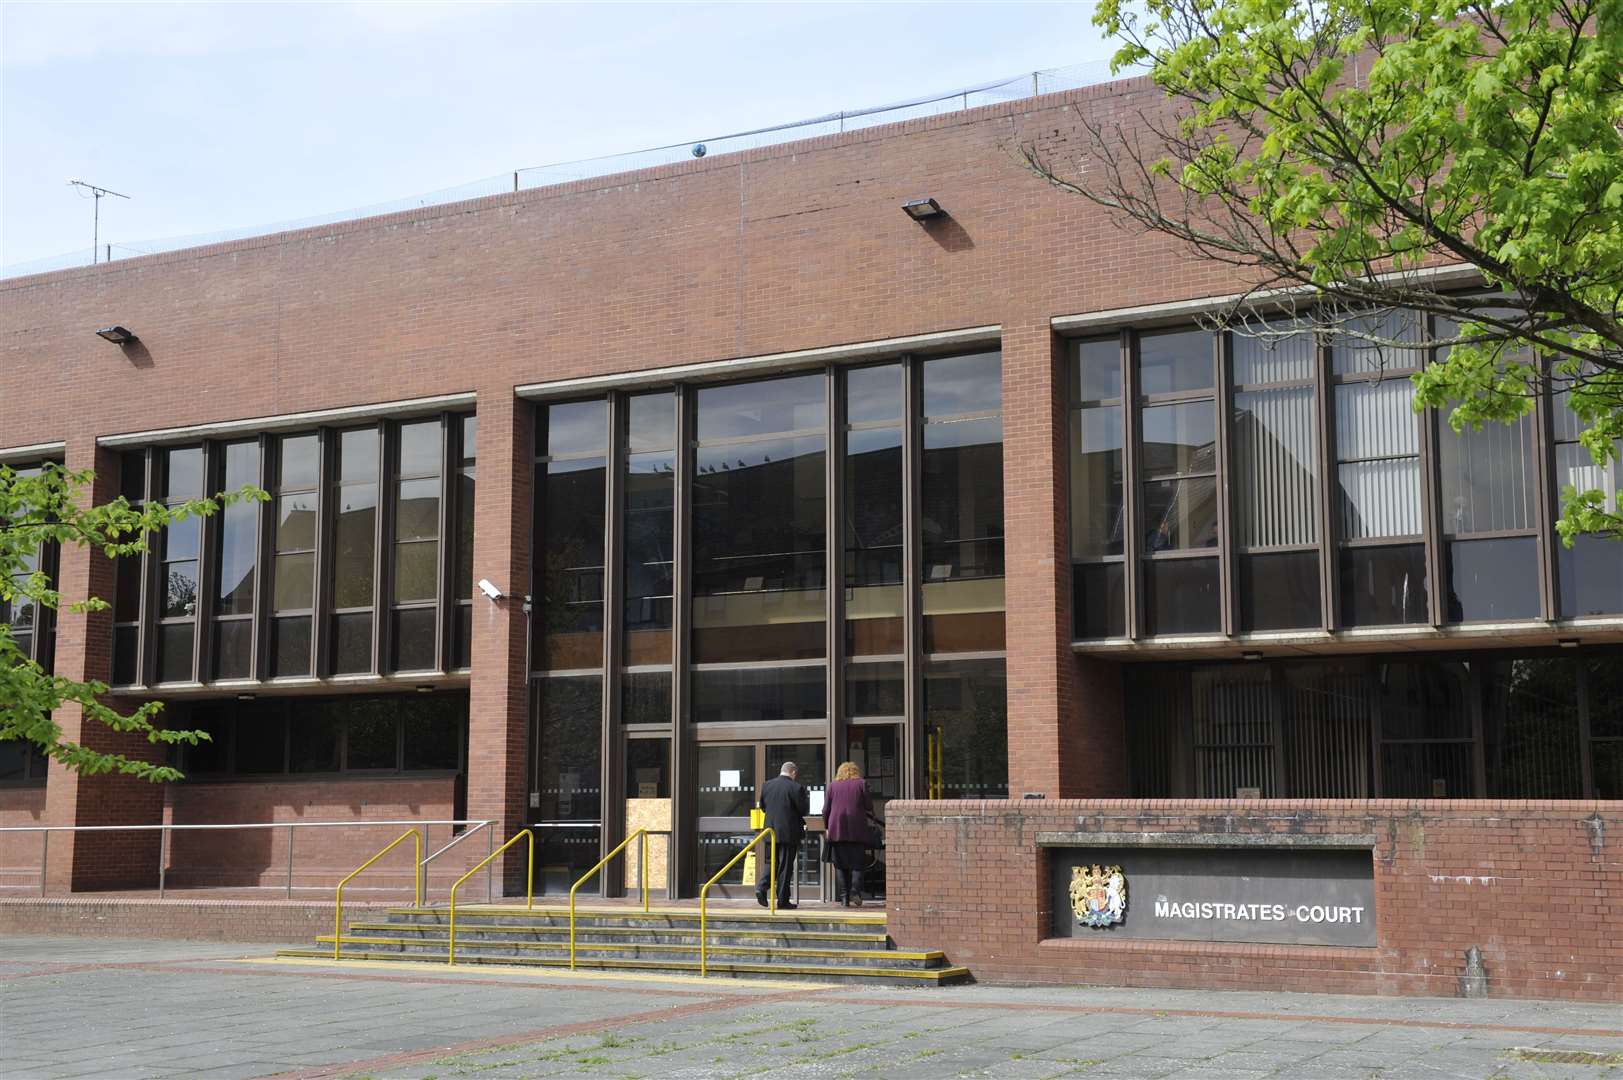 The incident happened at Folkestone Magistrates' Court